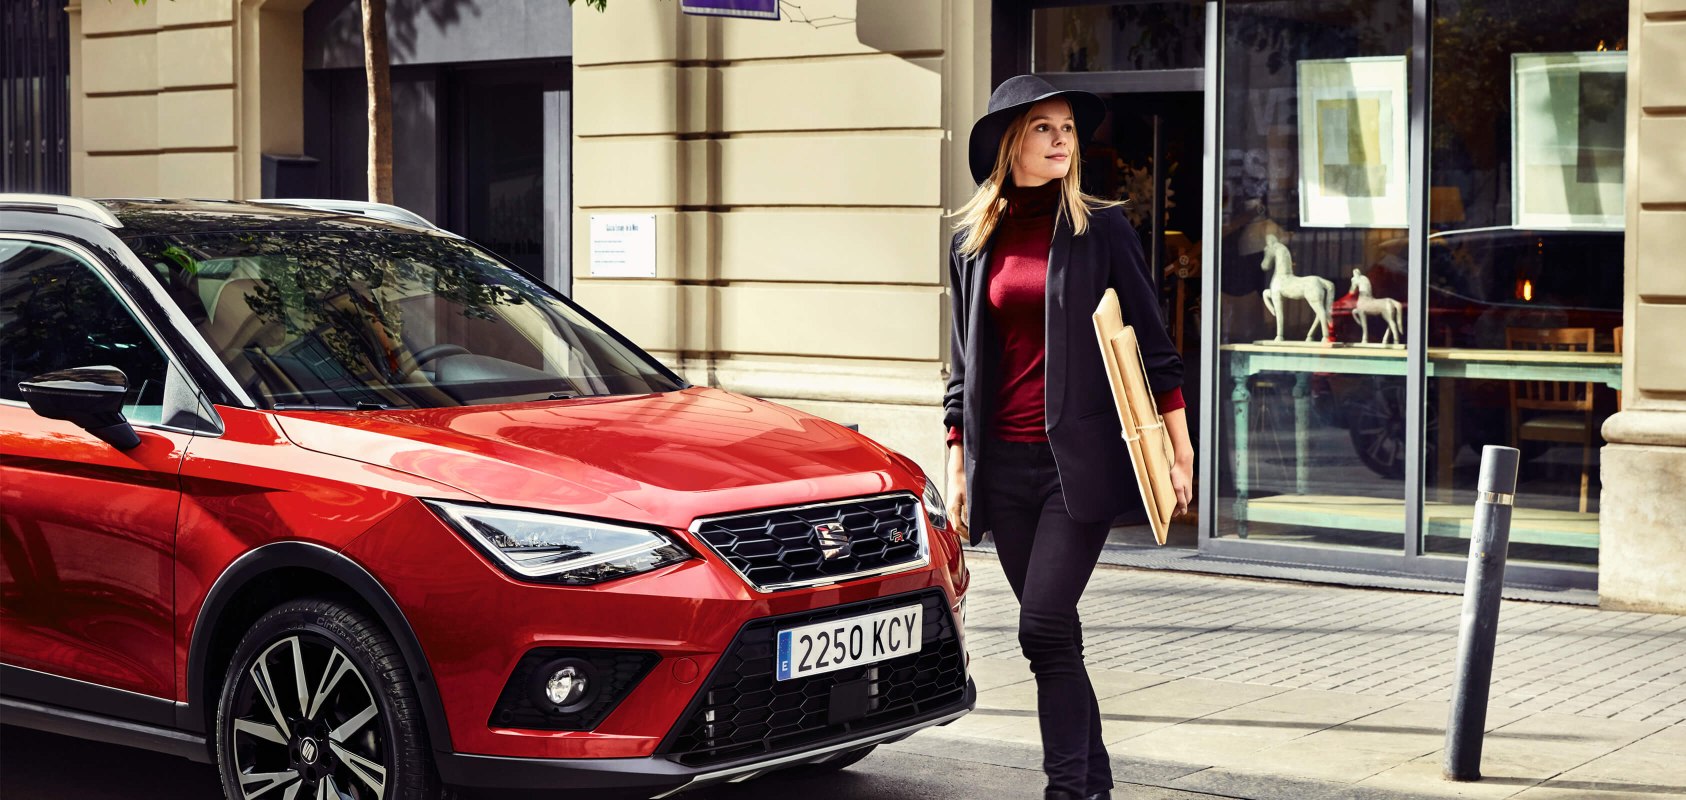 SEAT new car services maintenance mot checks –  woman walking in front of a red SEAT Arona crossover SUV